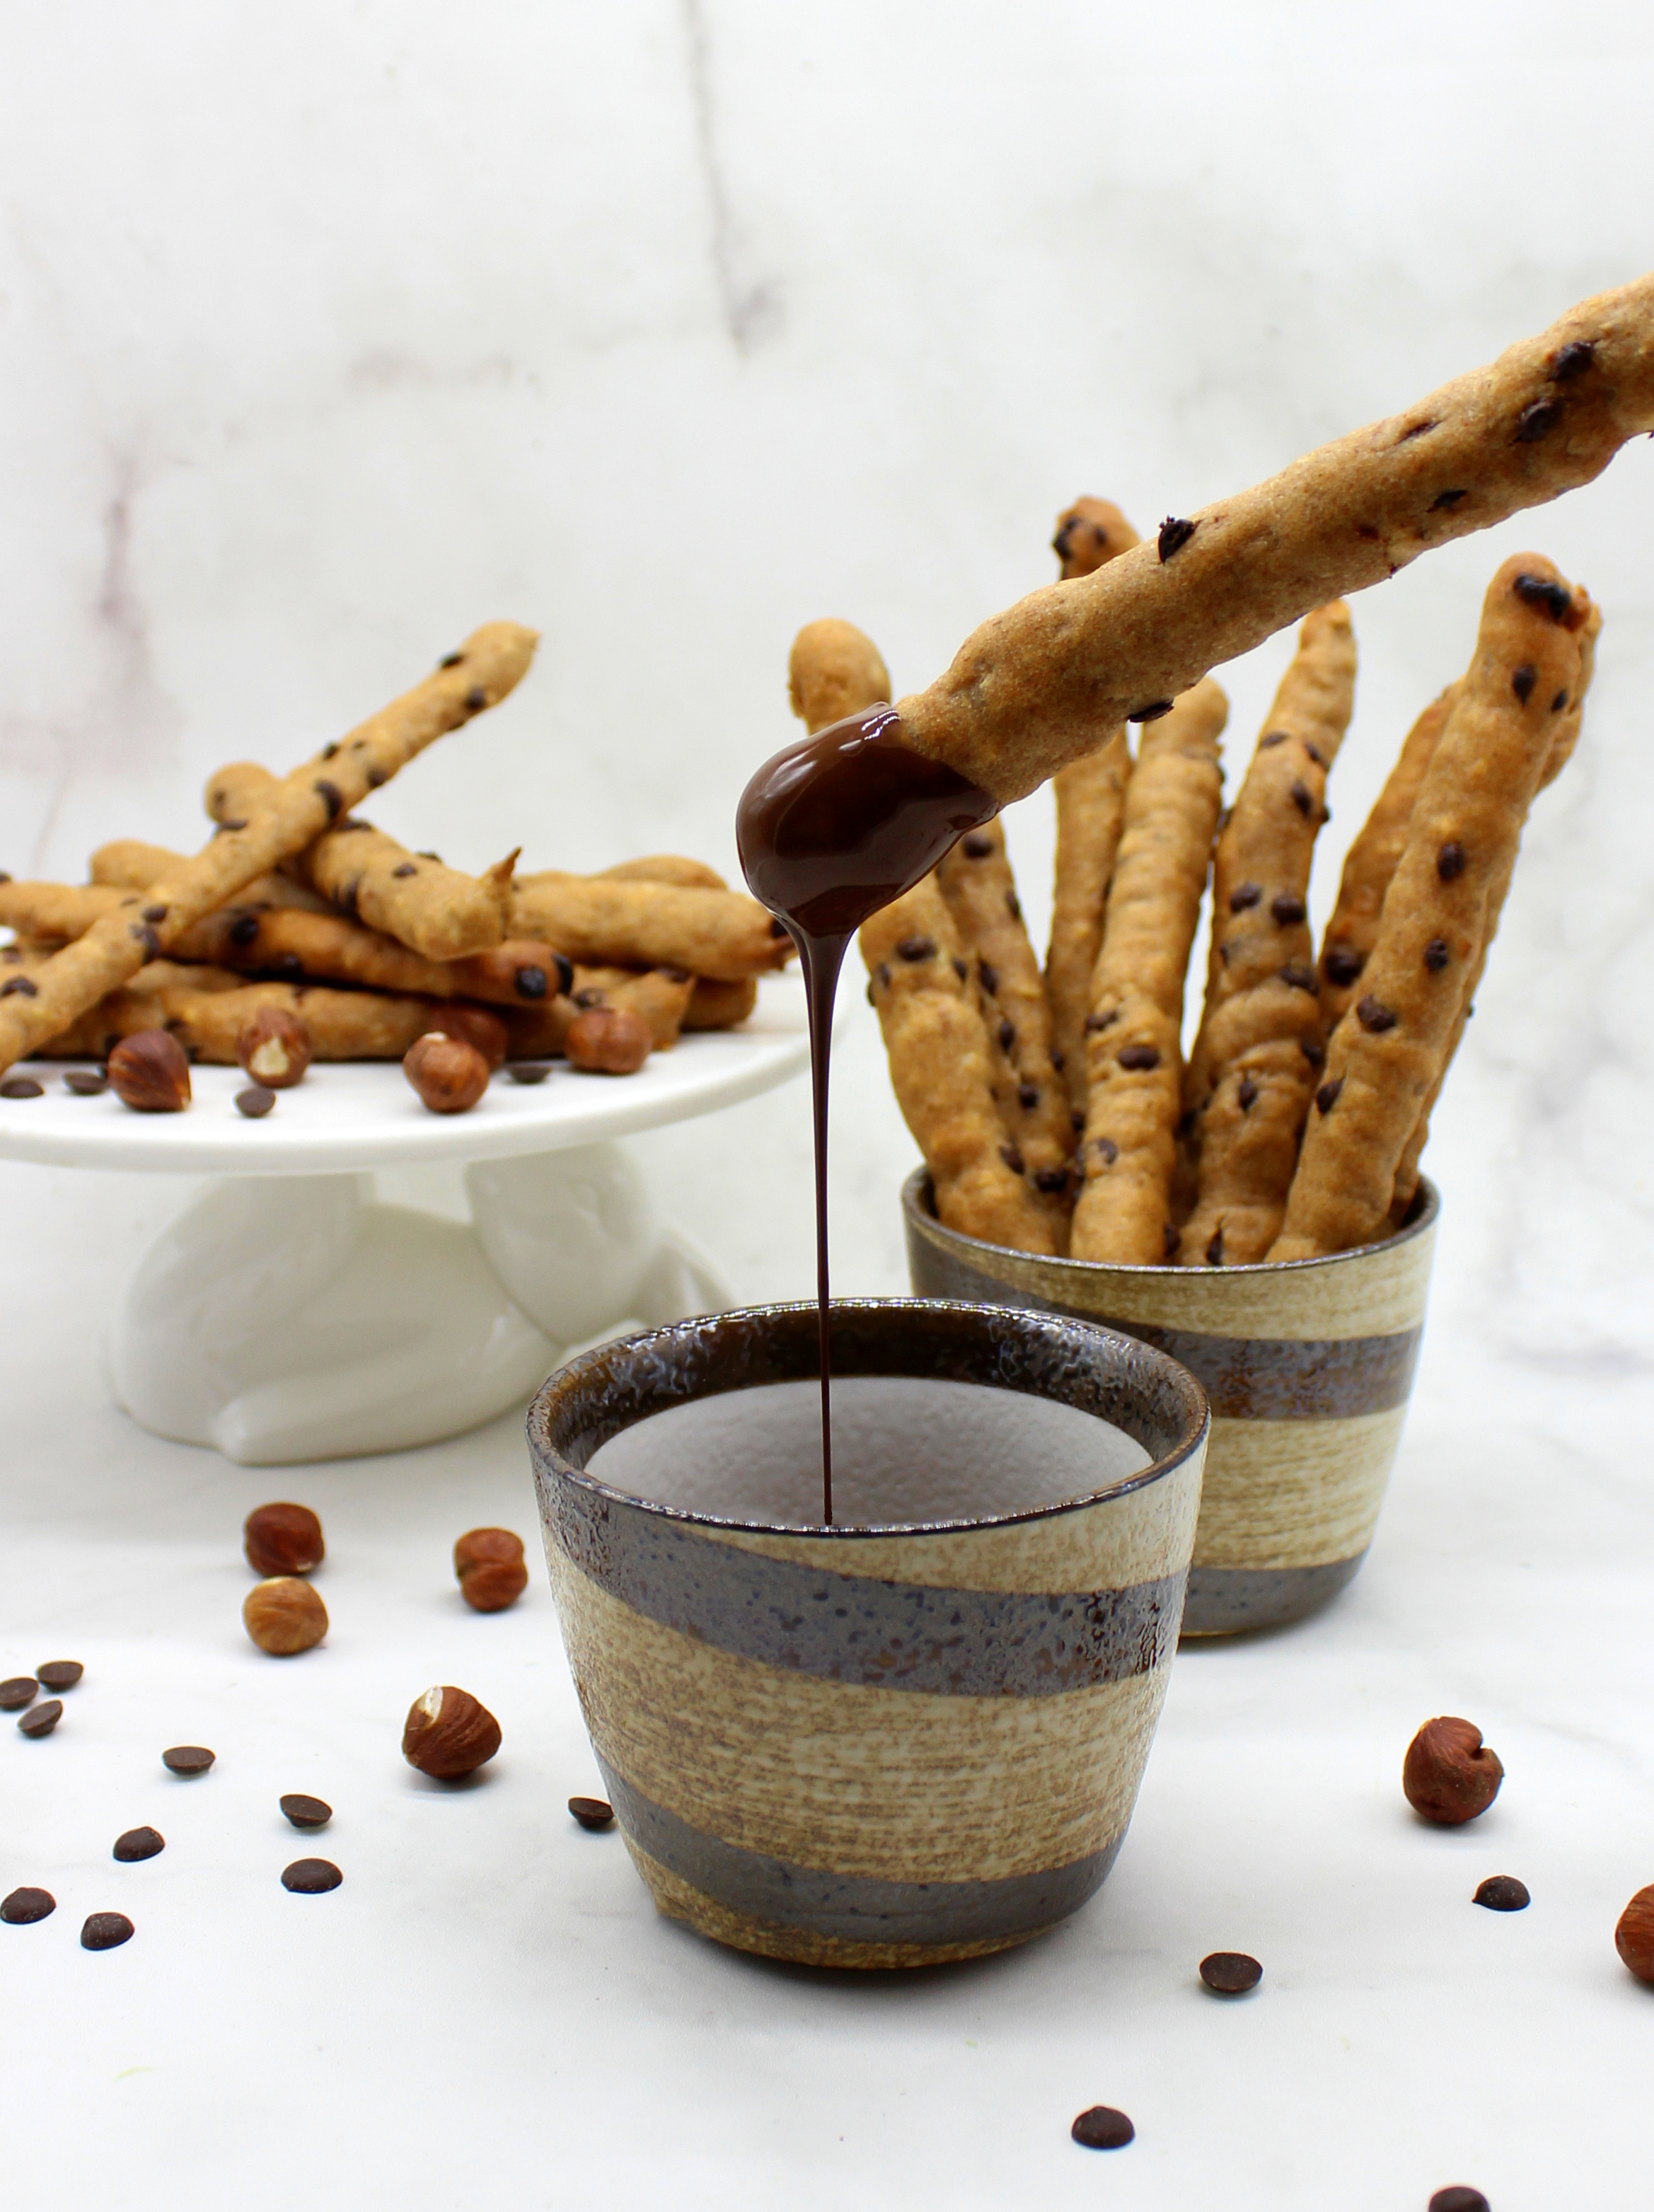 Cookie sticks dipped in chocolate